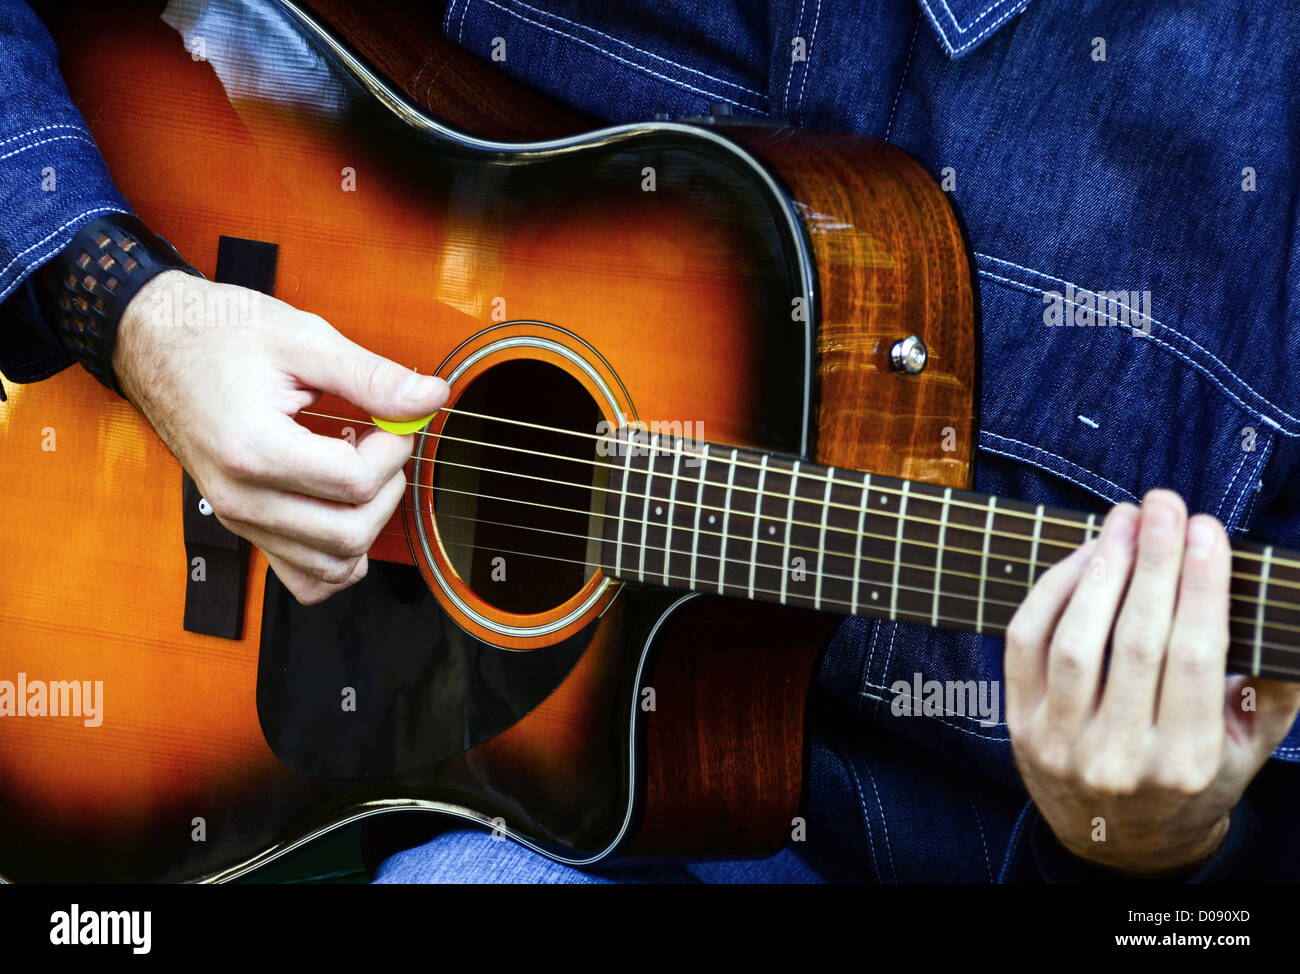 Man playing acoustic guitar Stock Photo